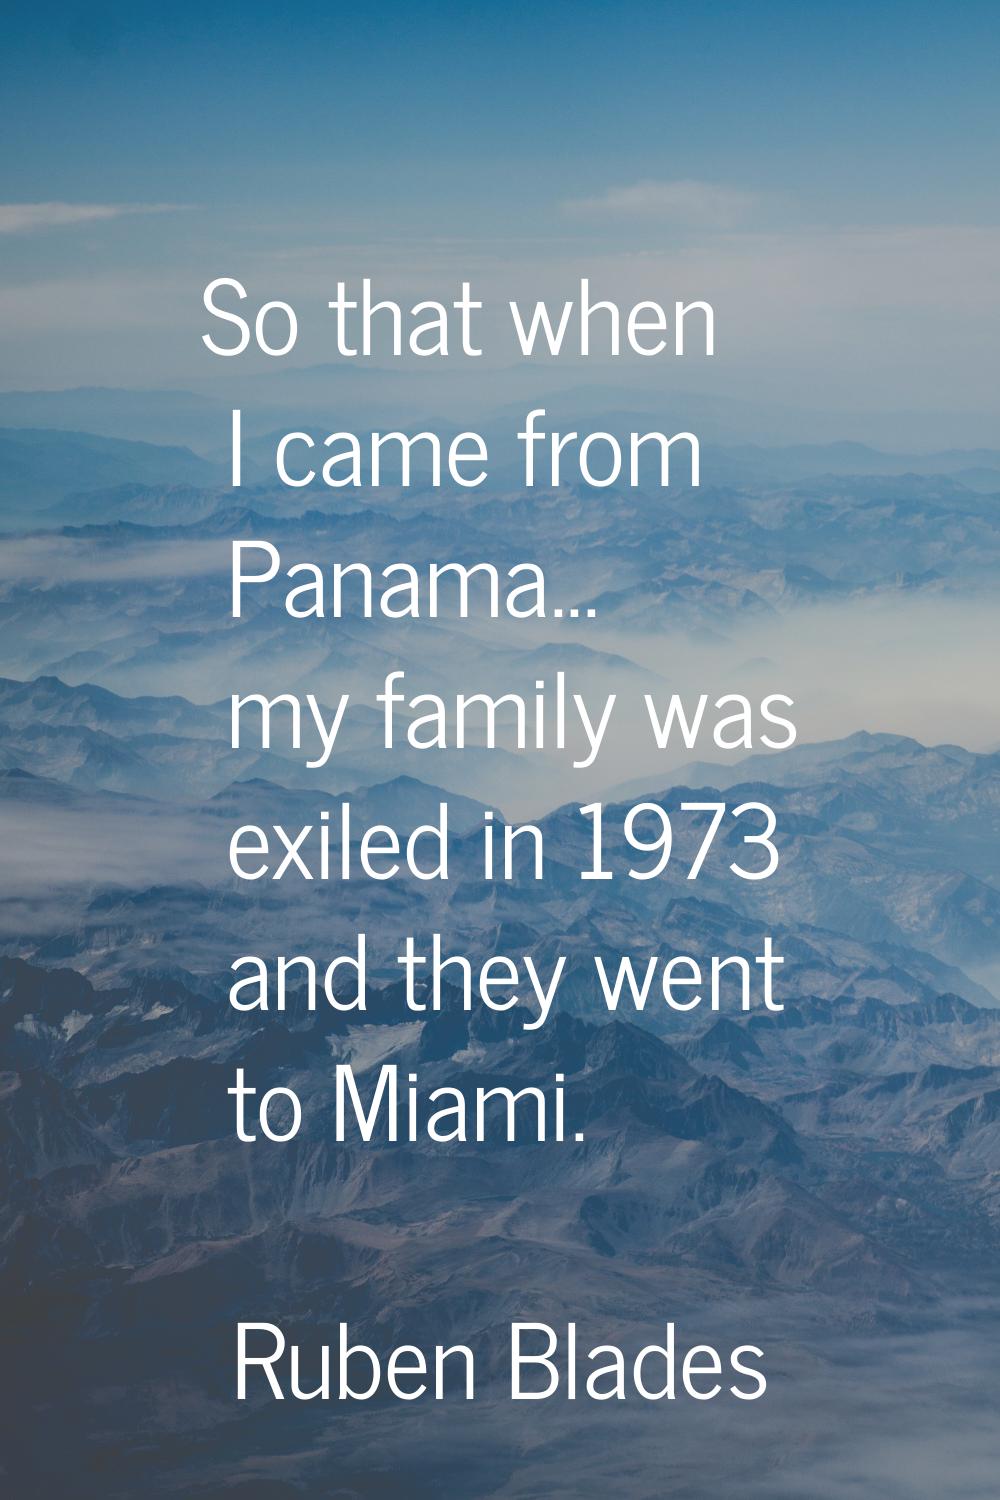 So that when I came from Panama... my family was exiled in 1973 and they went to Miami.